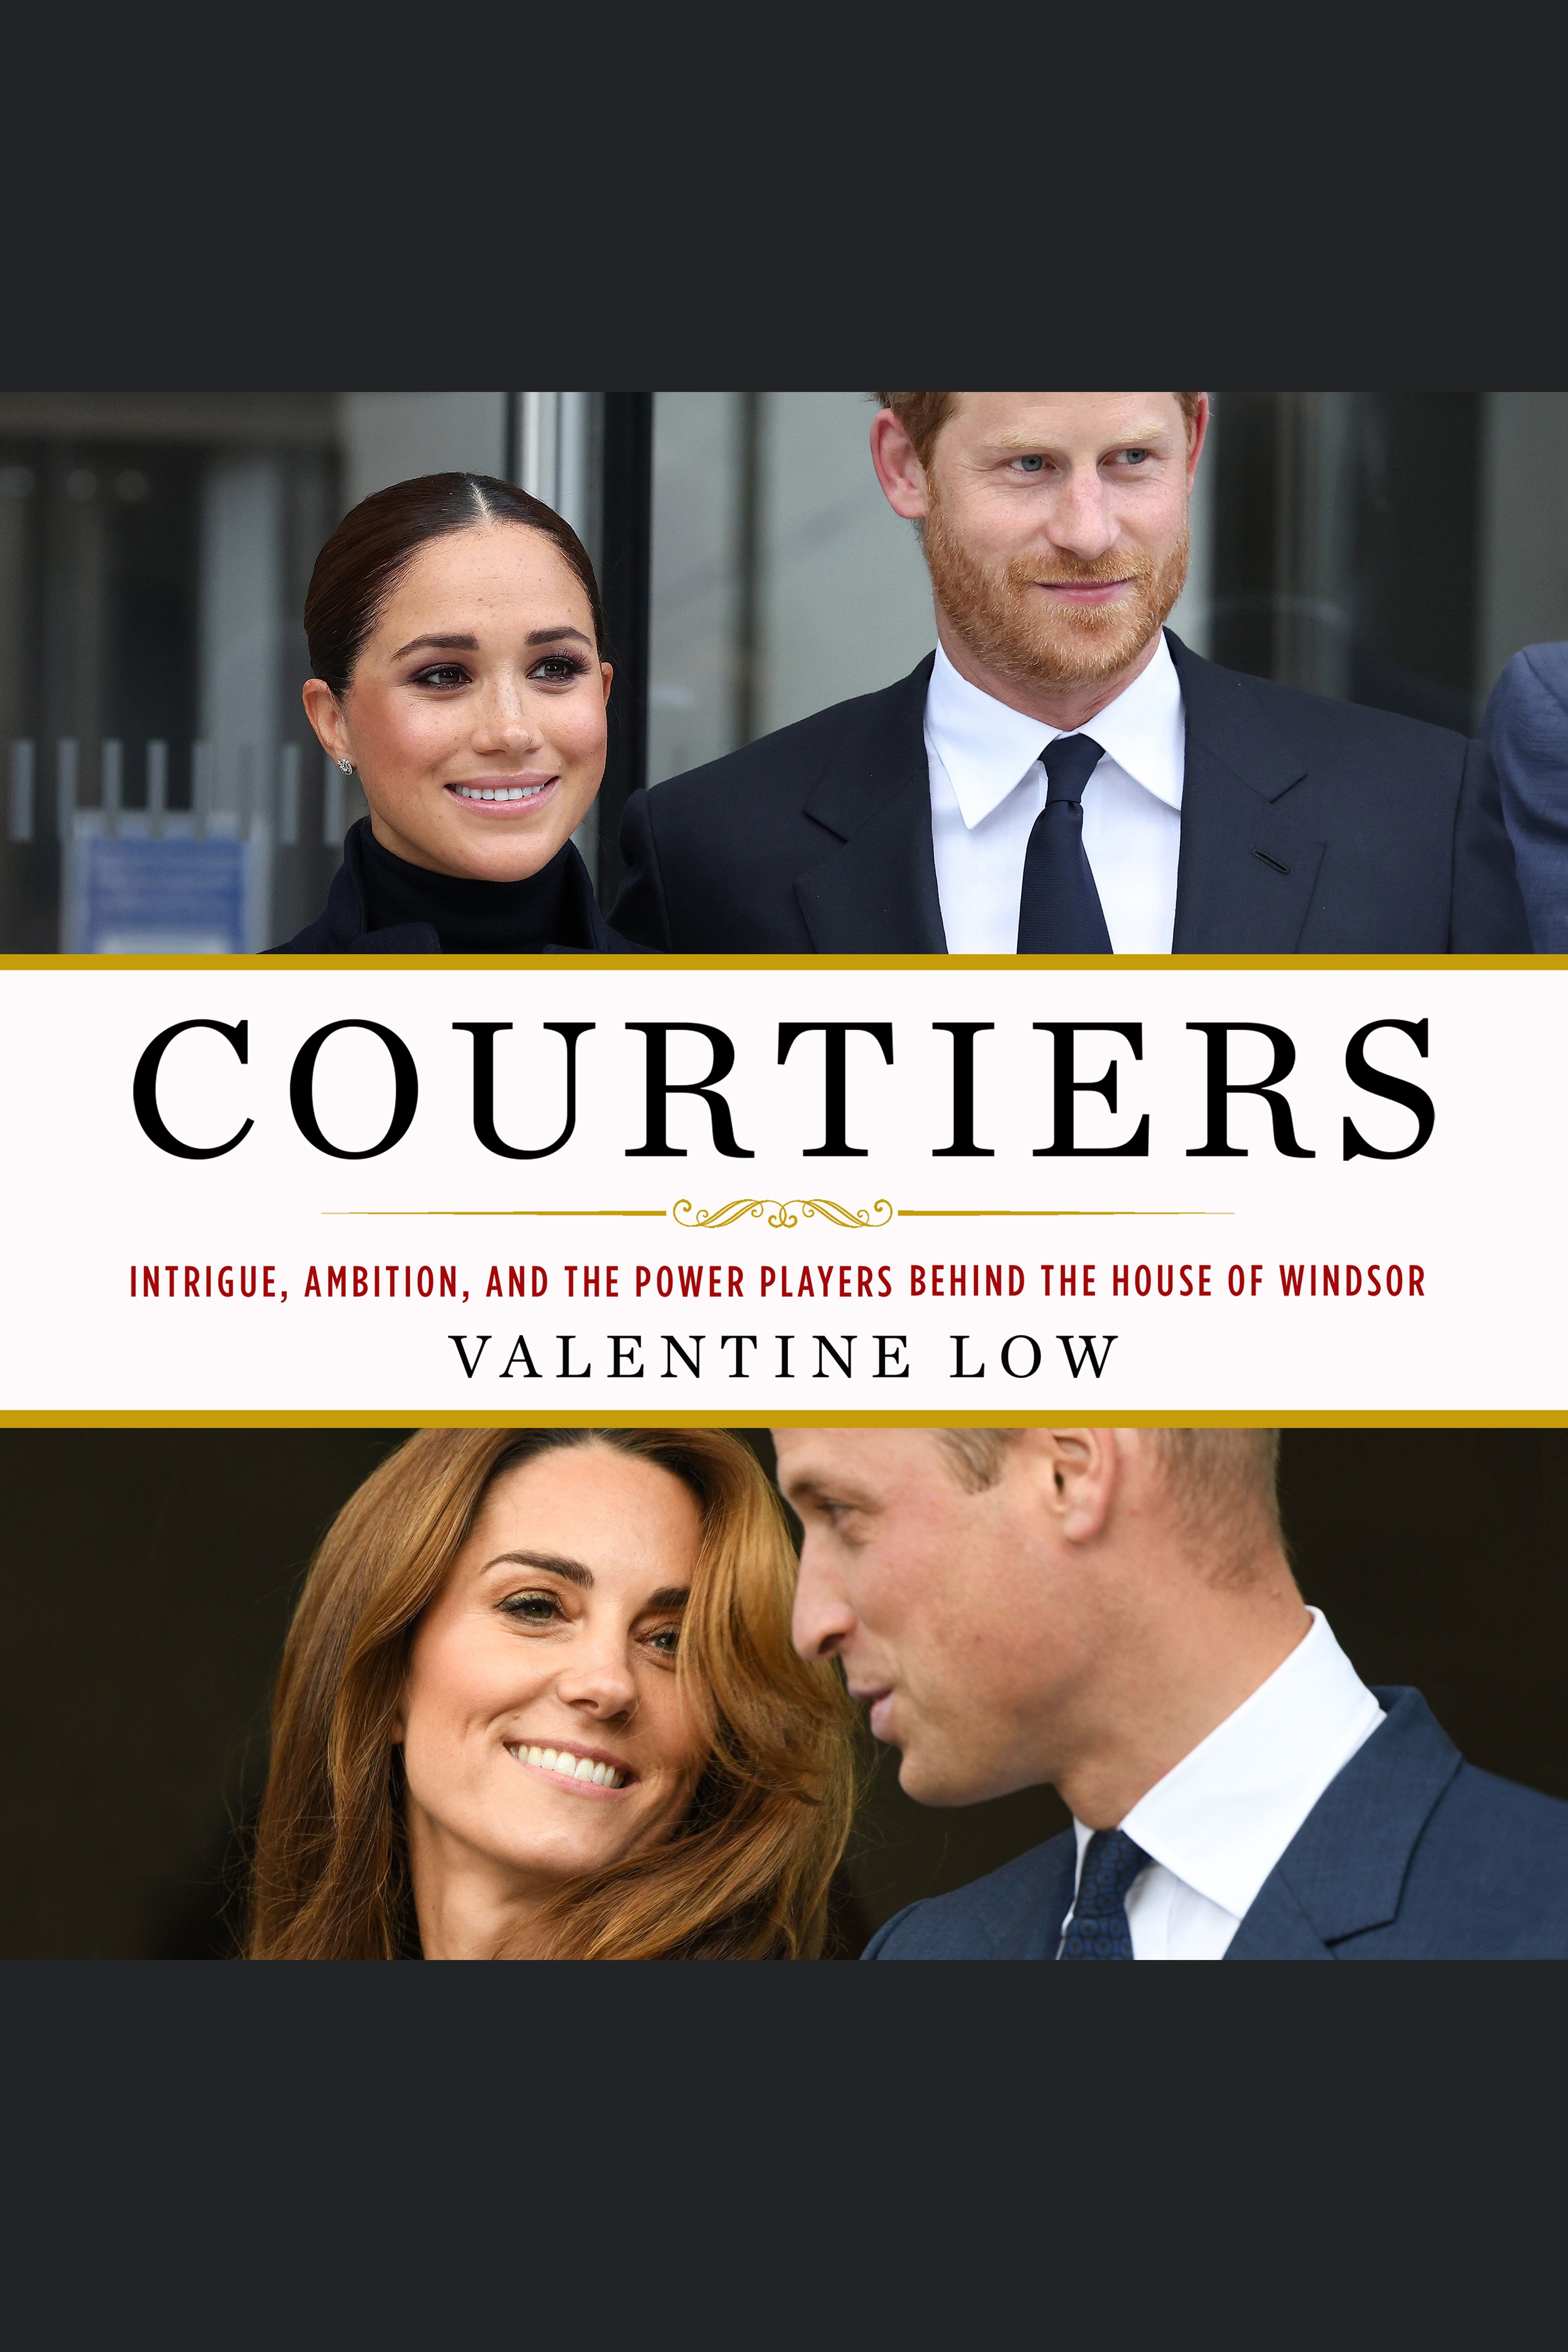 Courtiers Intrigue, Ambition, and the Power Players Behind the House of Windsor cover image